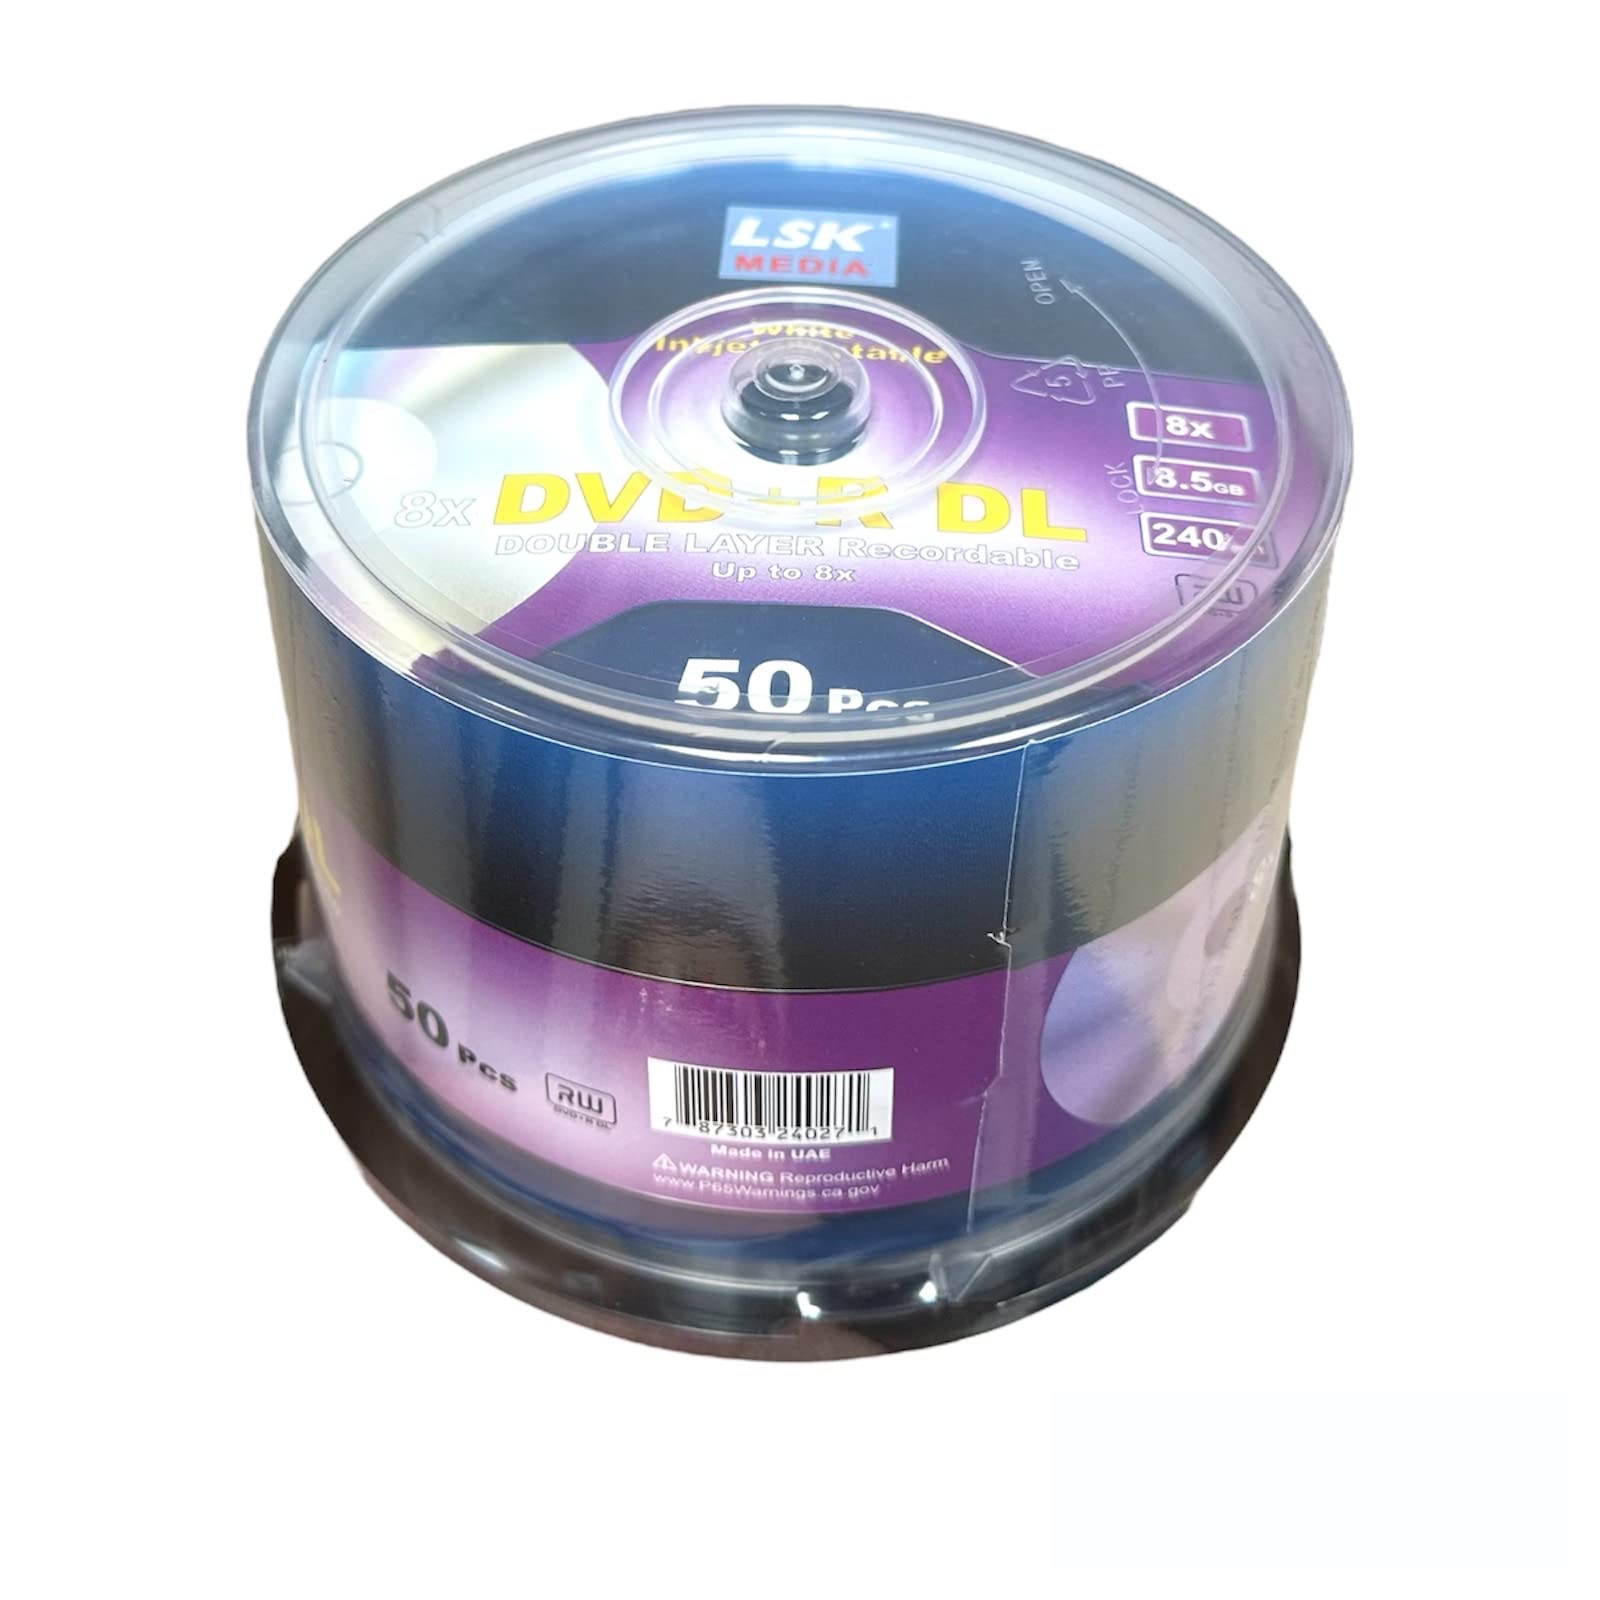 DVD+R DL Double Layer 8X 8.5GB 240min Video, White Inkjet Printable, by LSK Media, 50 Pack in Spindle | Blank DVDs for Burning Video | DVD Discs Blank | Recordable DVDs